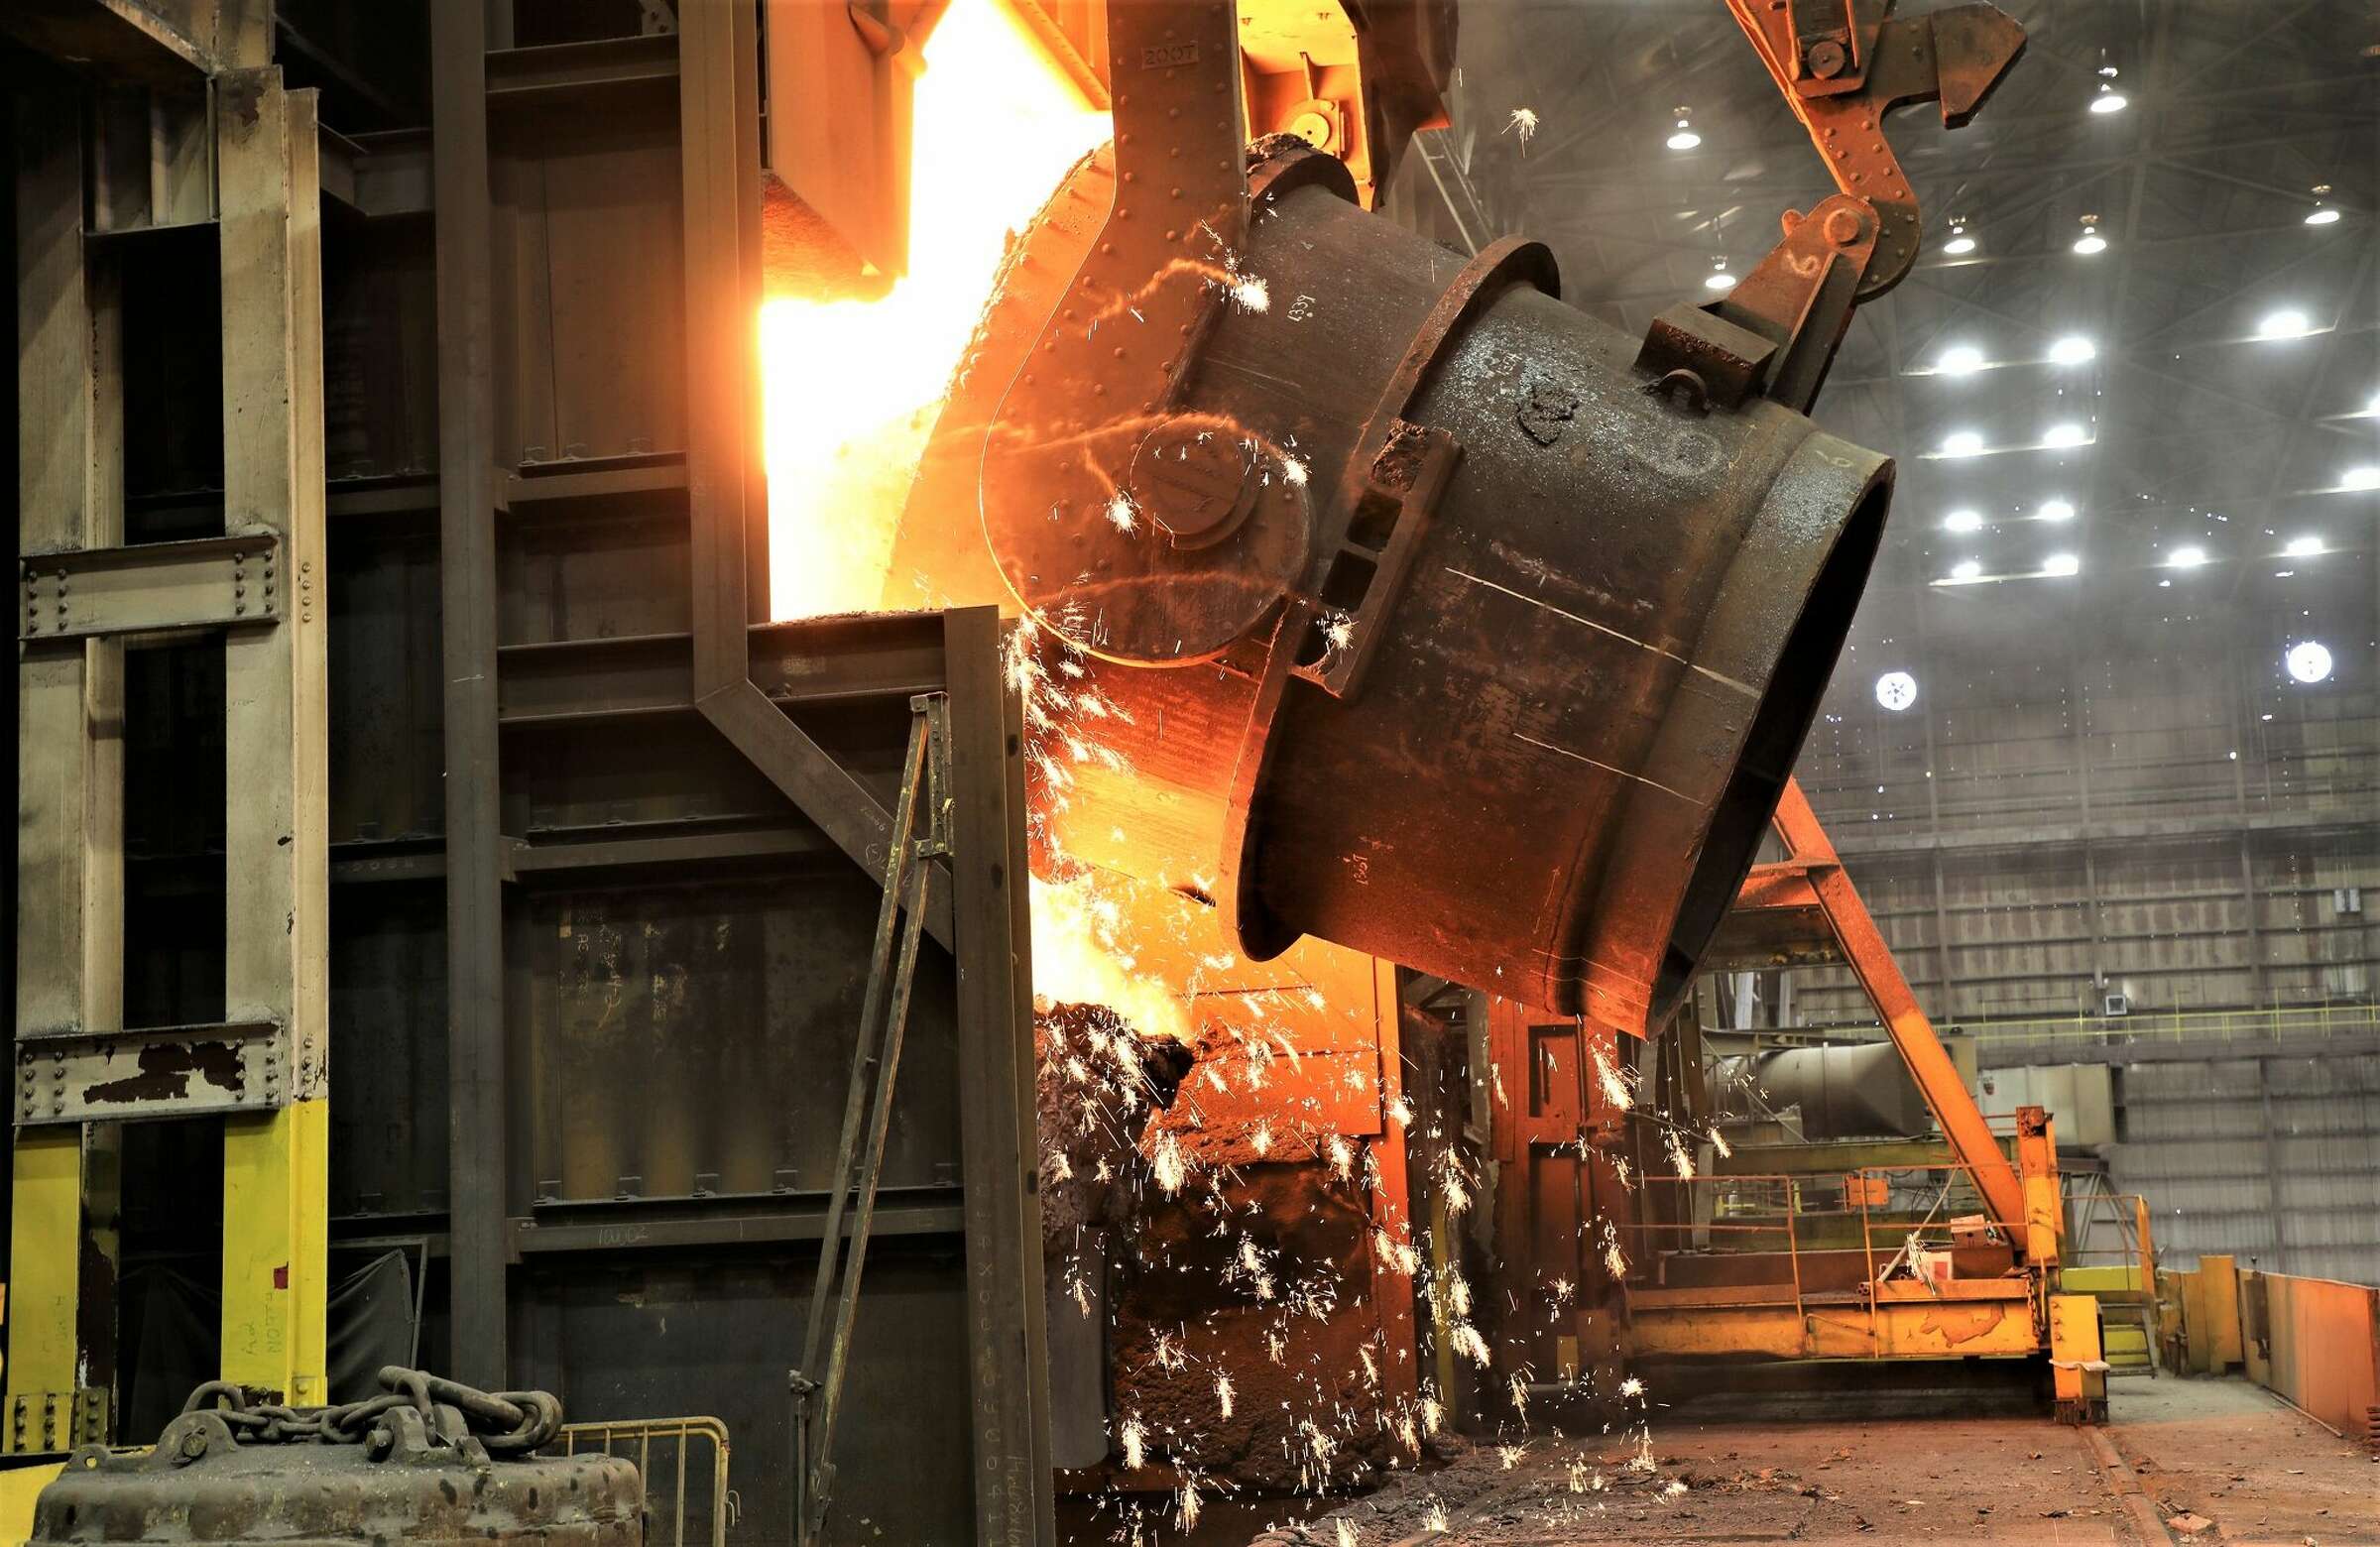 Since its inception in late 2020, the partnership between LSQ, Huntington and EXIM has resulted in more than $1.5 billion in early payments being extended to U. S. Steel scrap and coal suppliers.